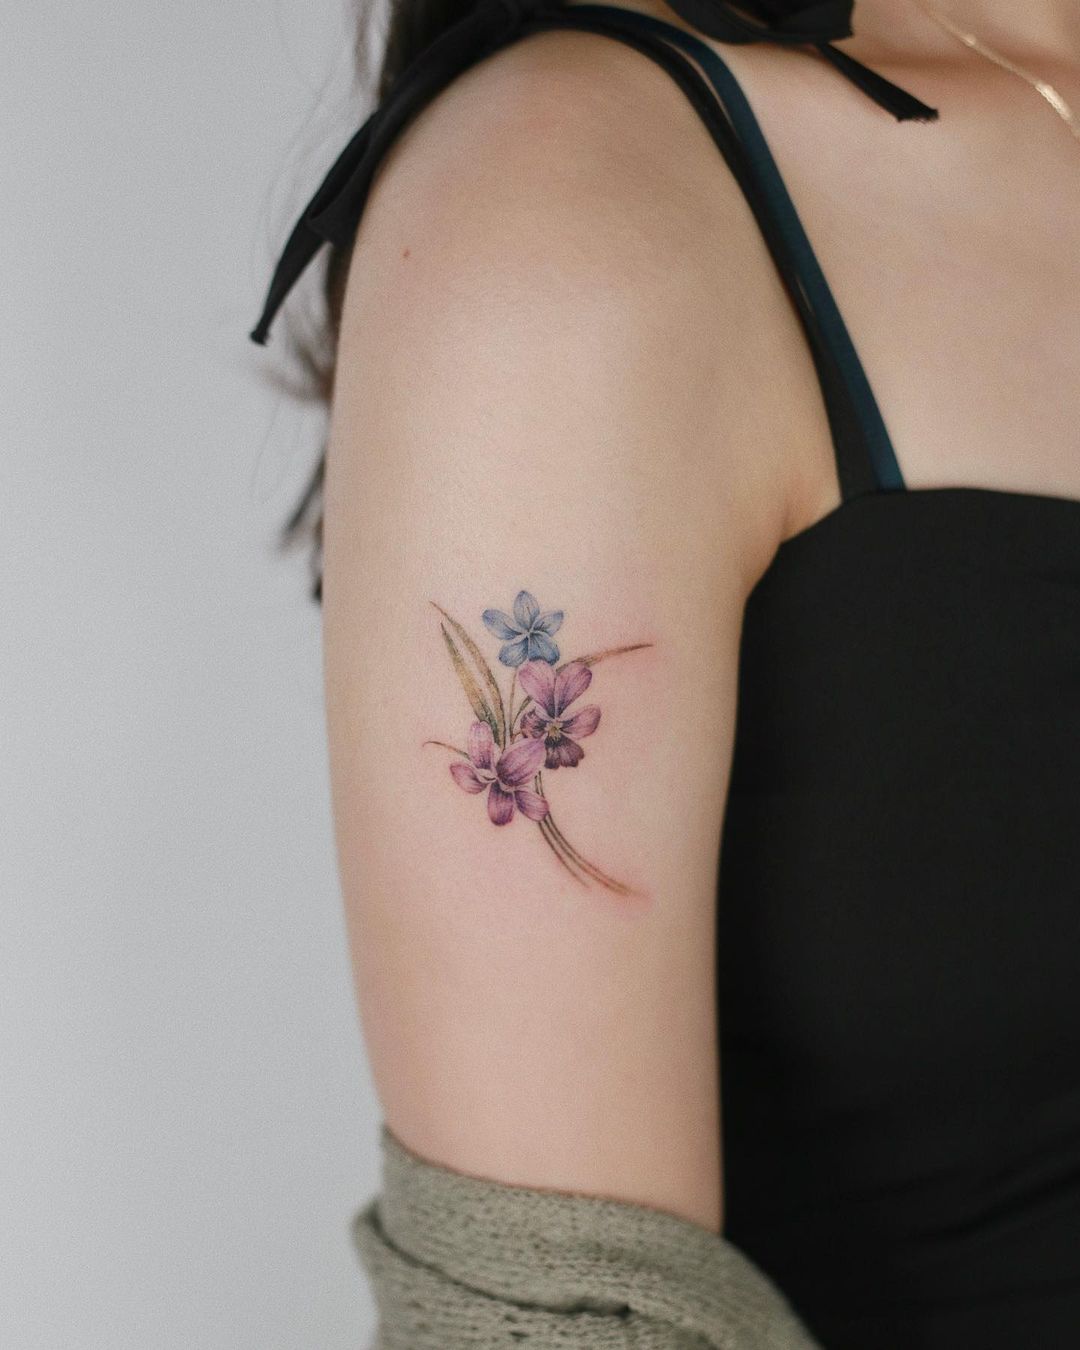 🟣Violet tattoo designs are beautiful and full of symbolic meanings. The  violet flower symbolizes modesty, innocence, virtue, affection… | Instagram